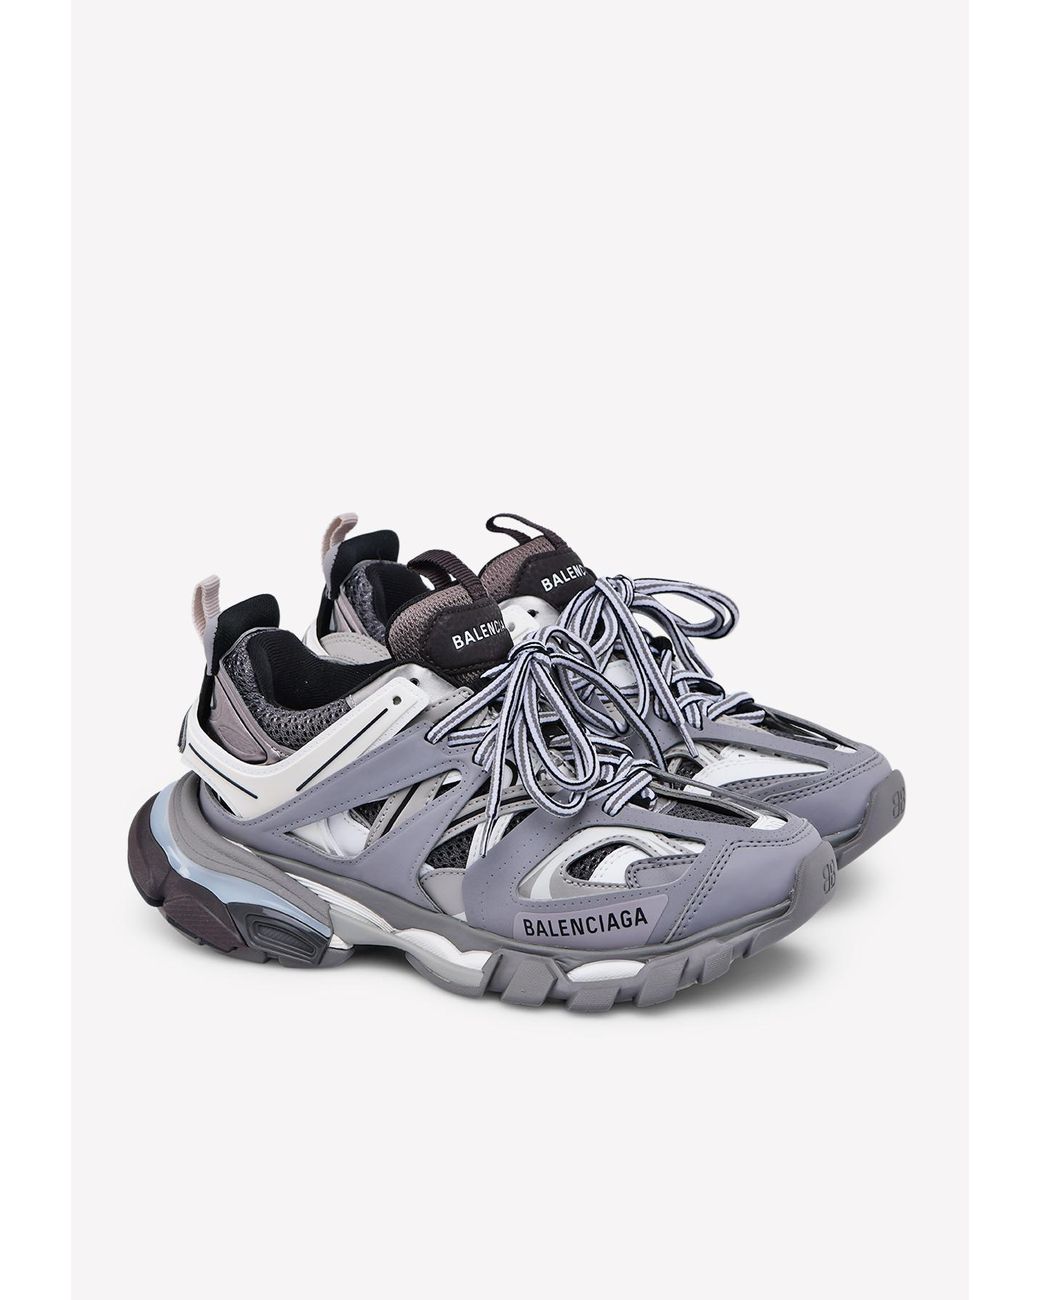 Balenciaga 'track' Sneakers in Grey (Gray) for Men - Save 1% - Lyst